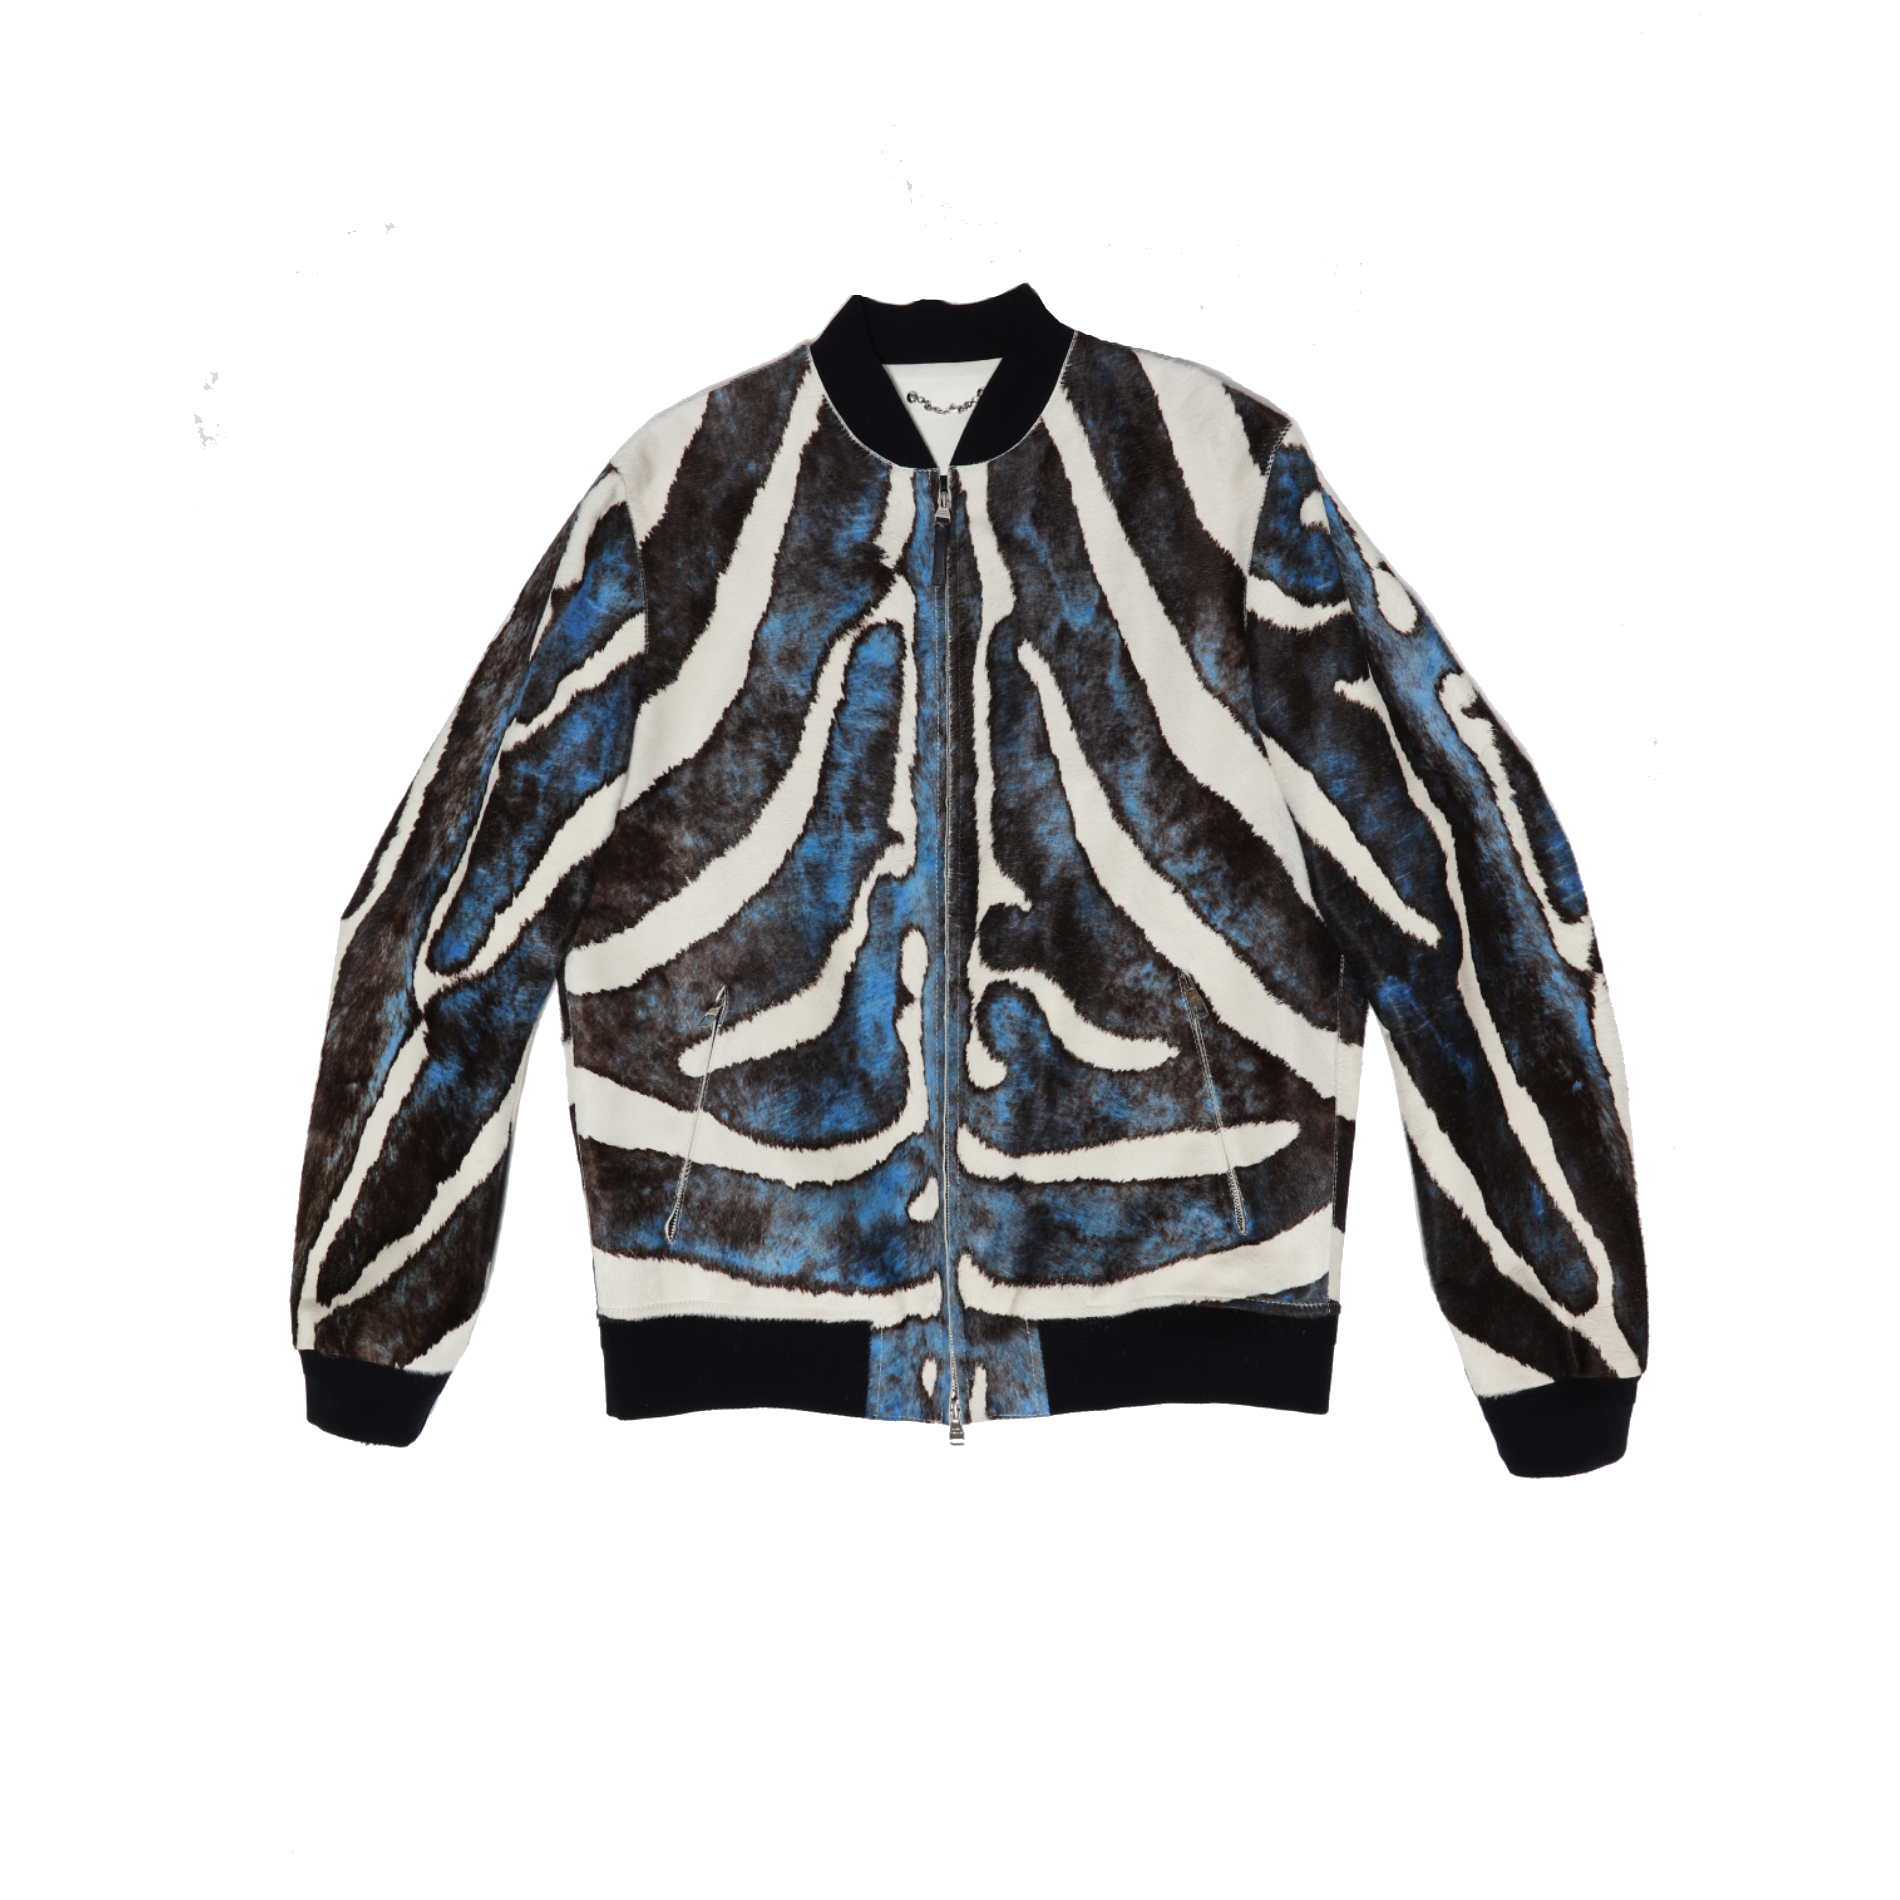 Louis Vuitton SS17 Chapman Shaved Fur Leather Bomber